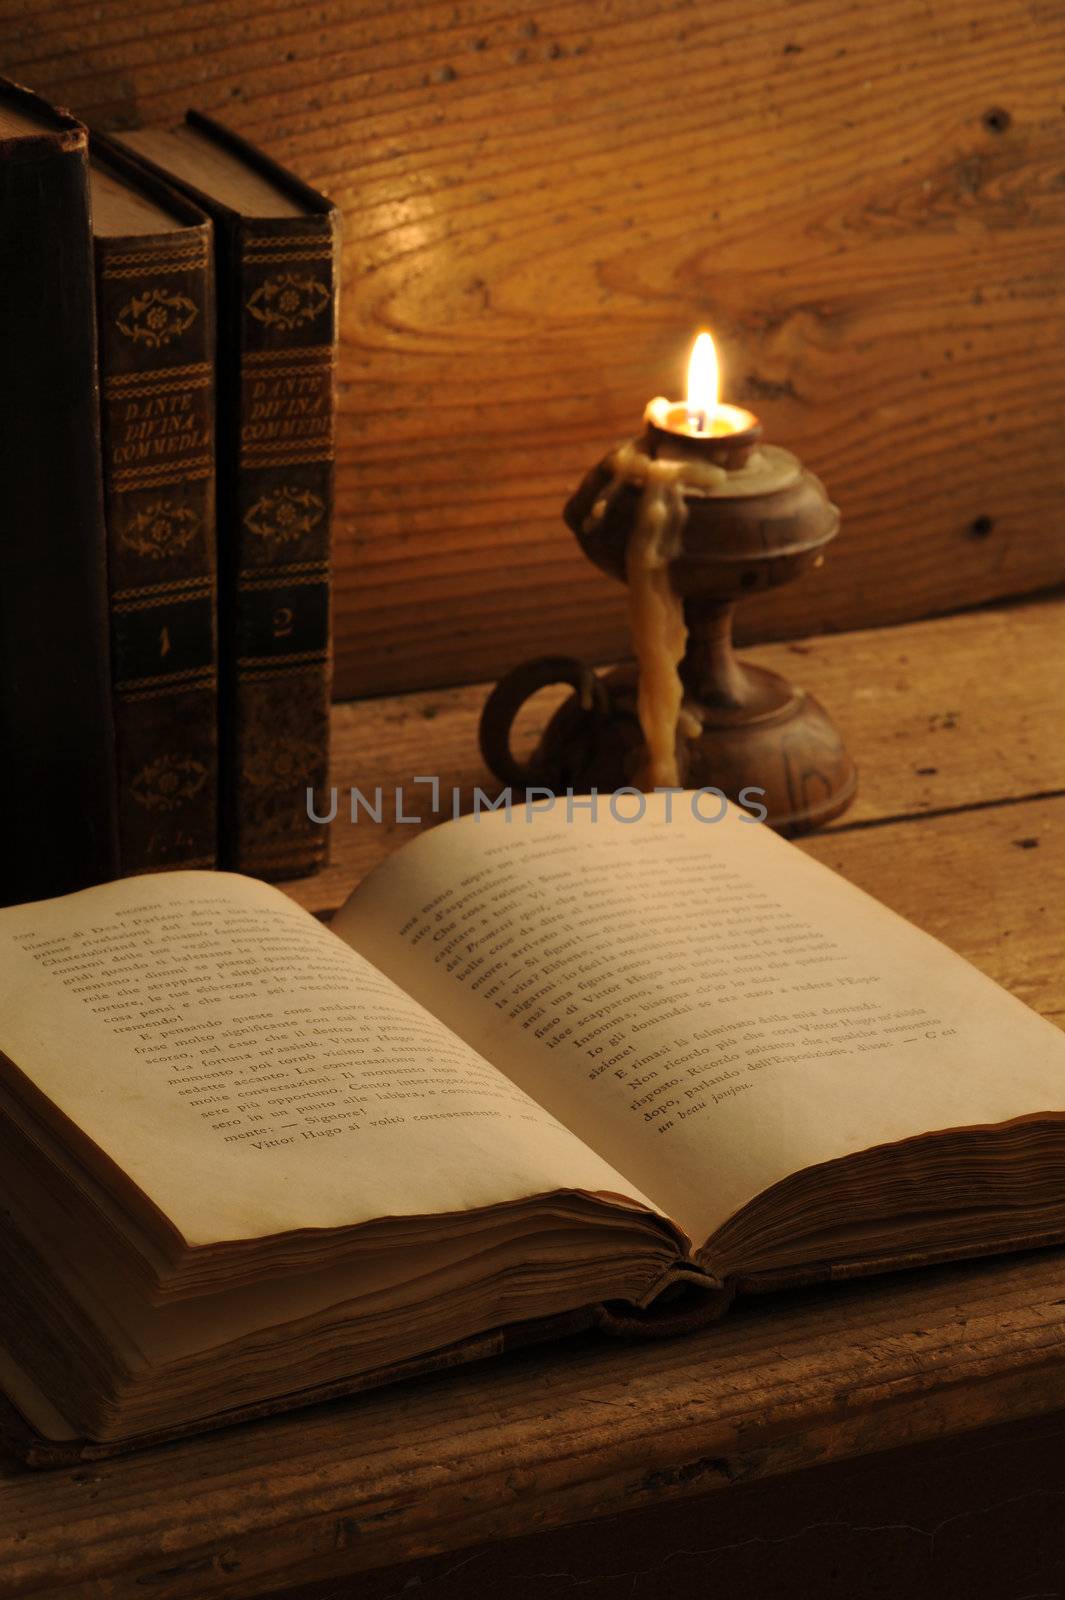 old book on a wooden table by candlelight by stokkete